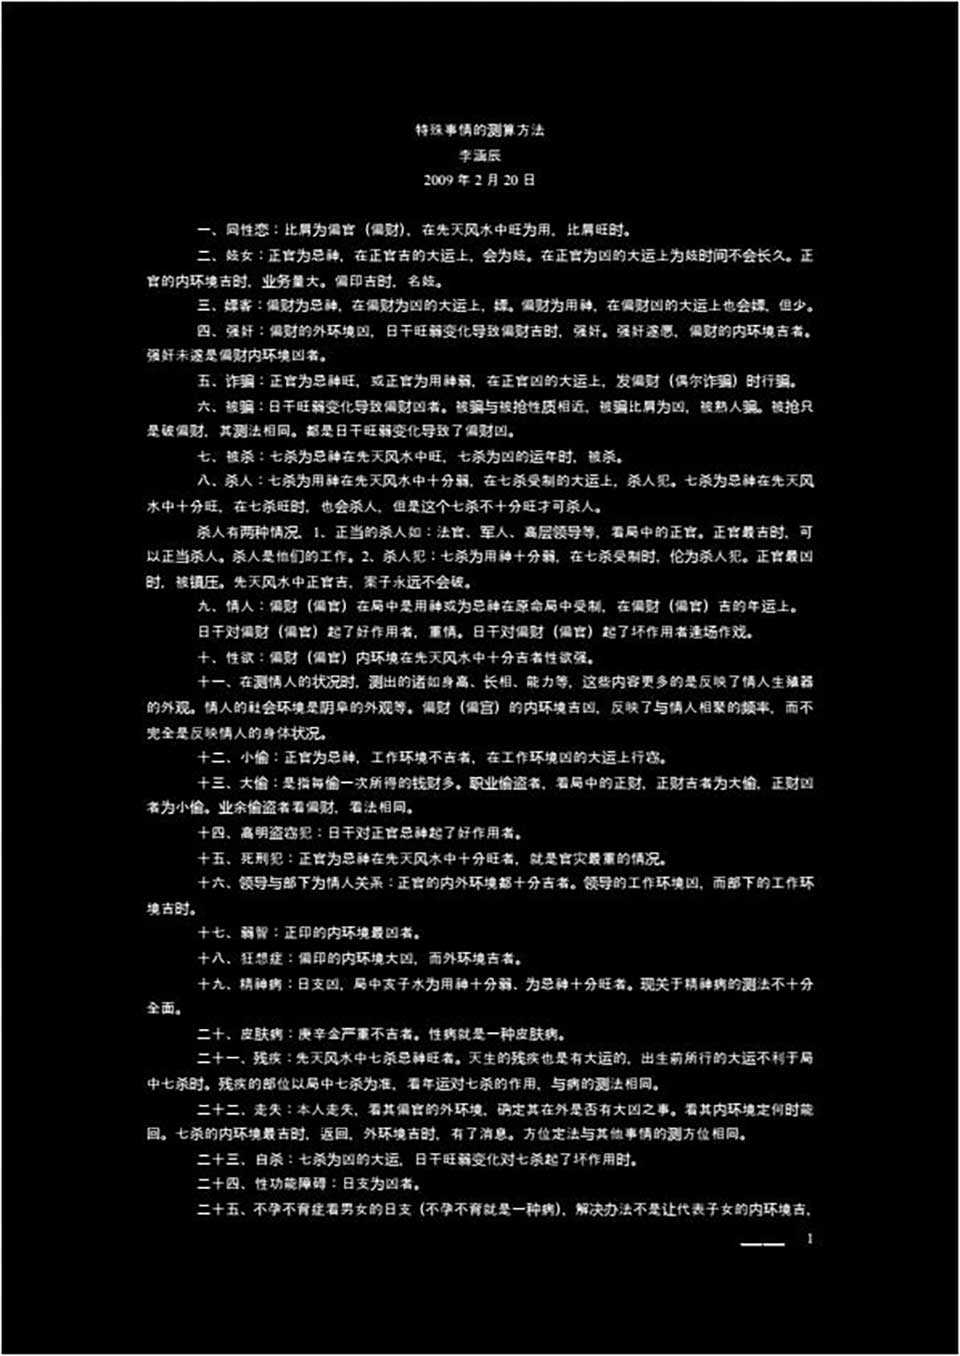 Li Hanchen-20090220 special things to measure the method (a school) 2 pages.pdf